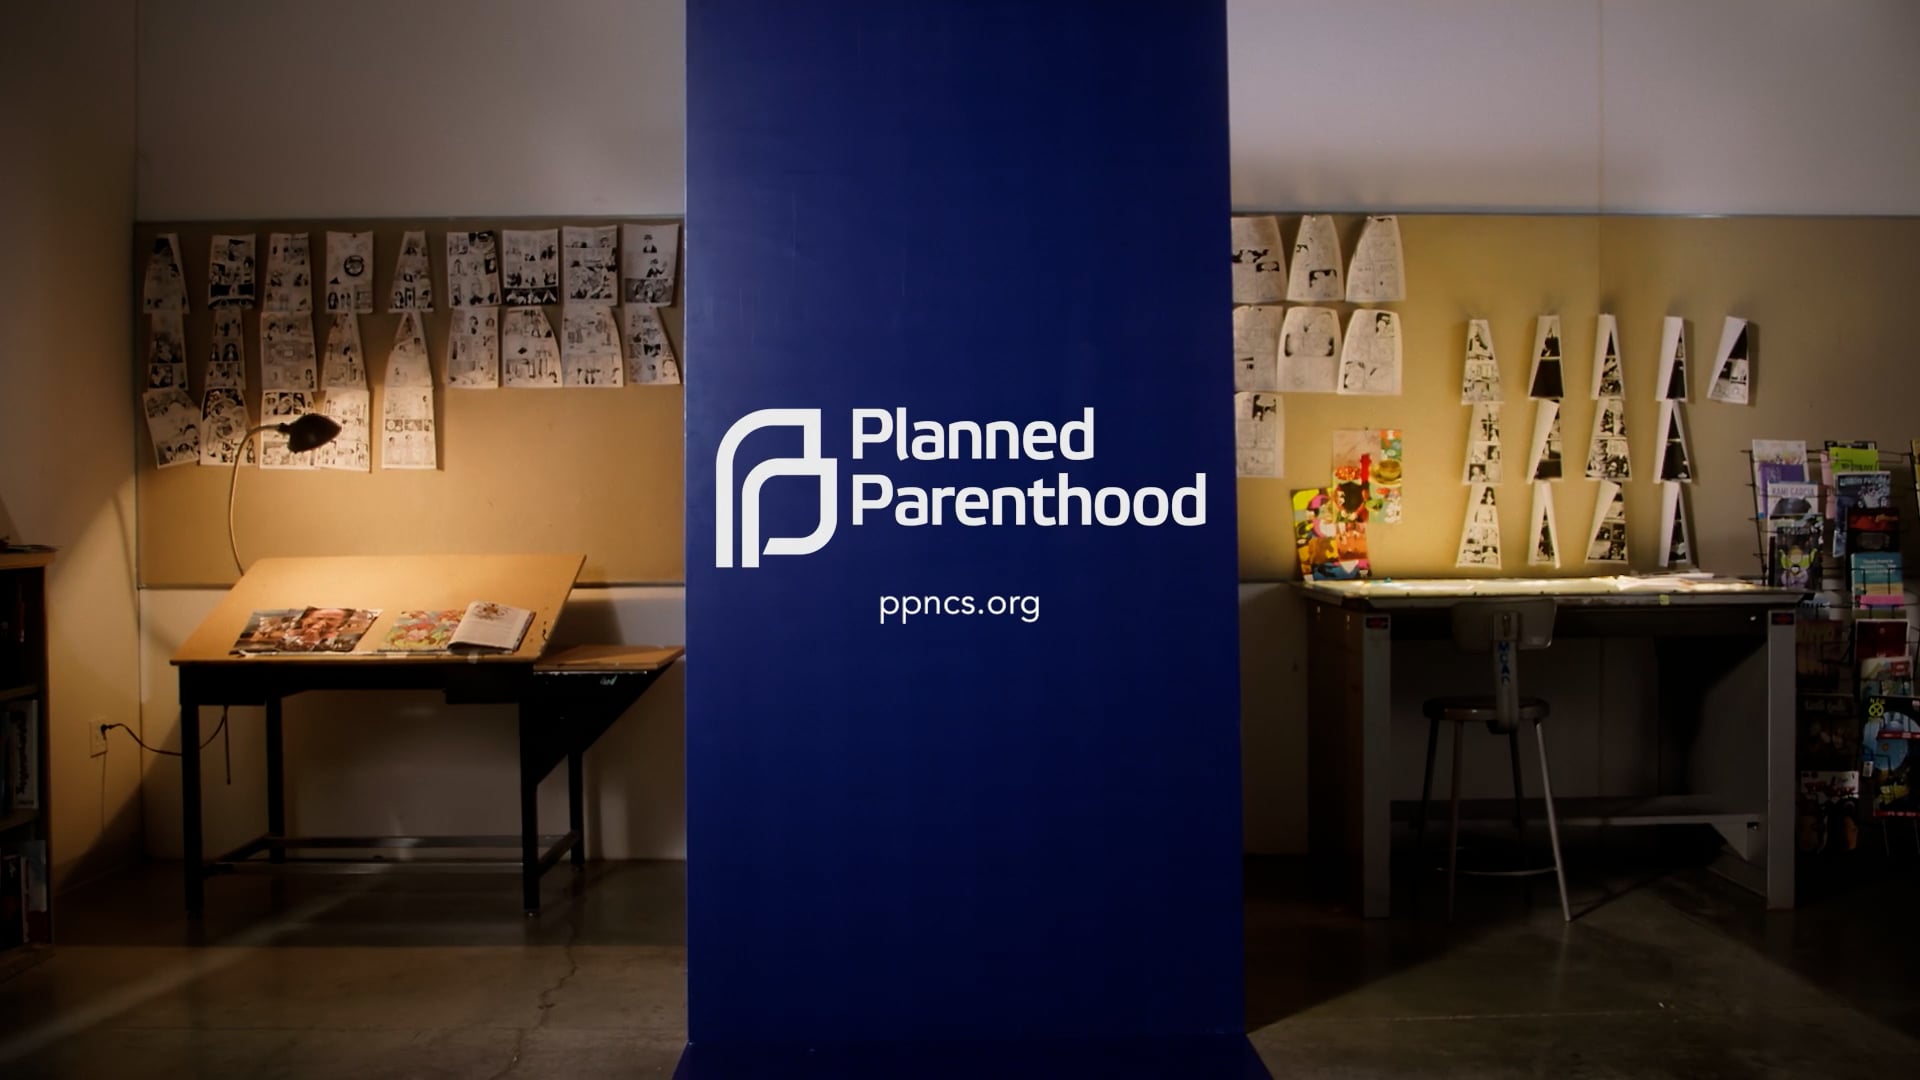 Planned Parenthood "This Space is for You" (:60)